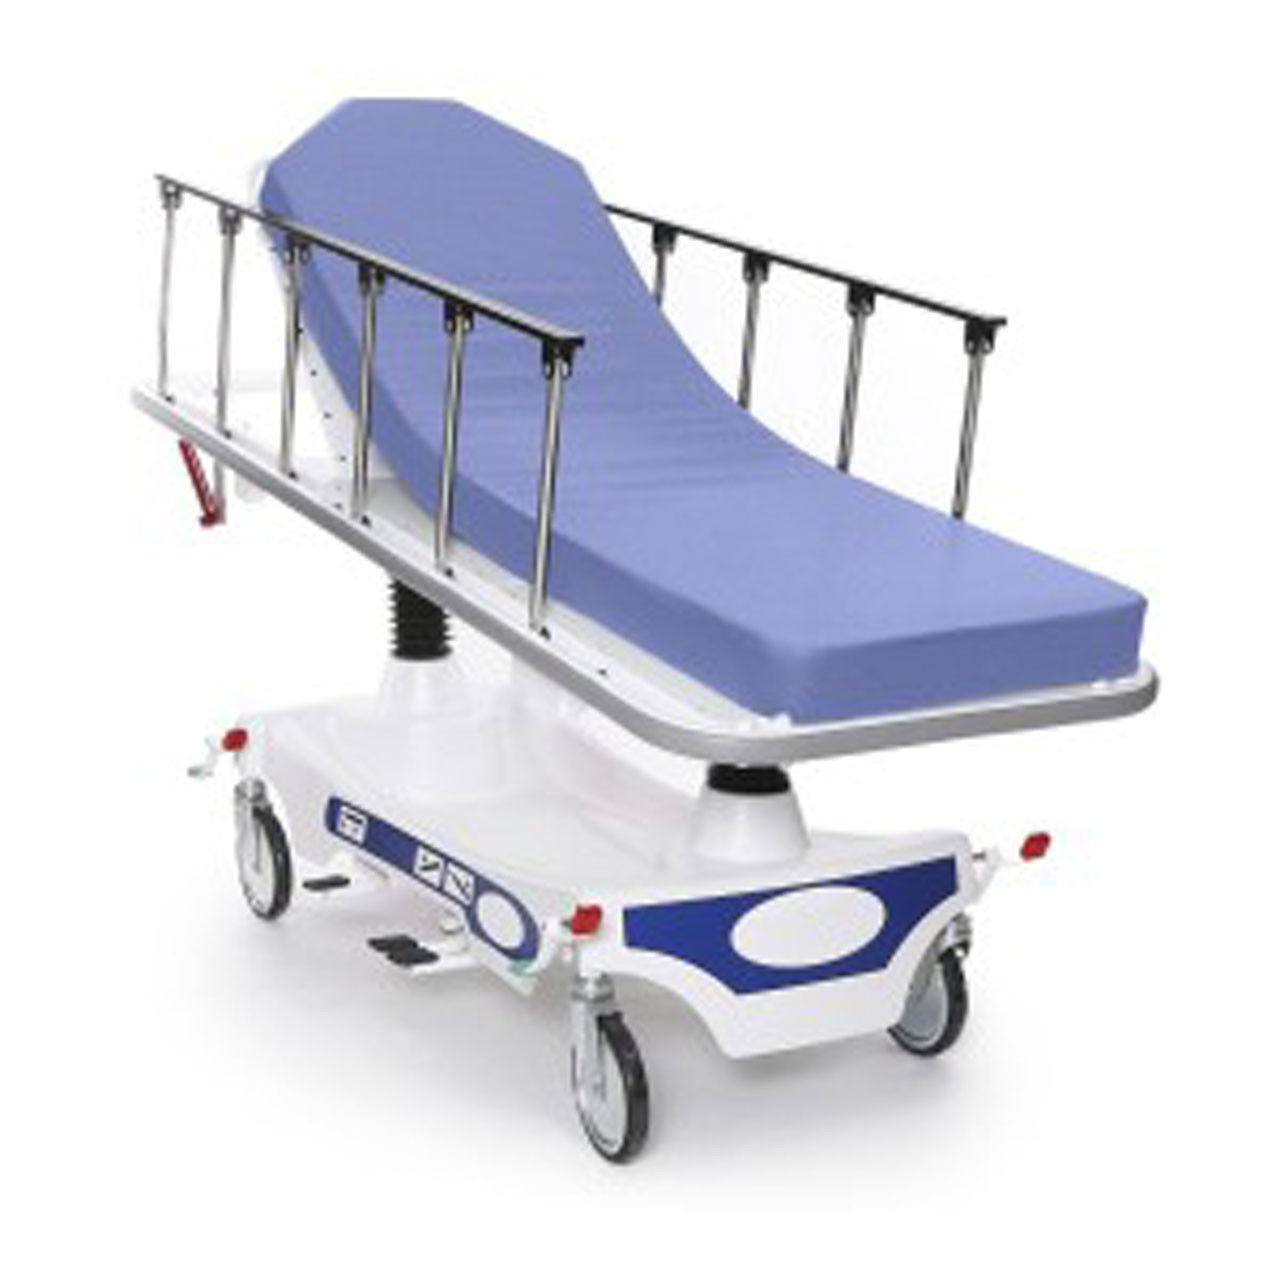 What color choices are there for these stretcher sheets?